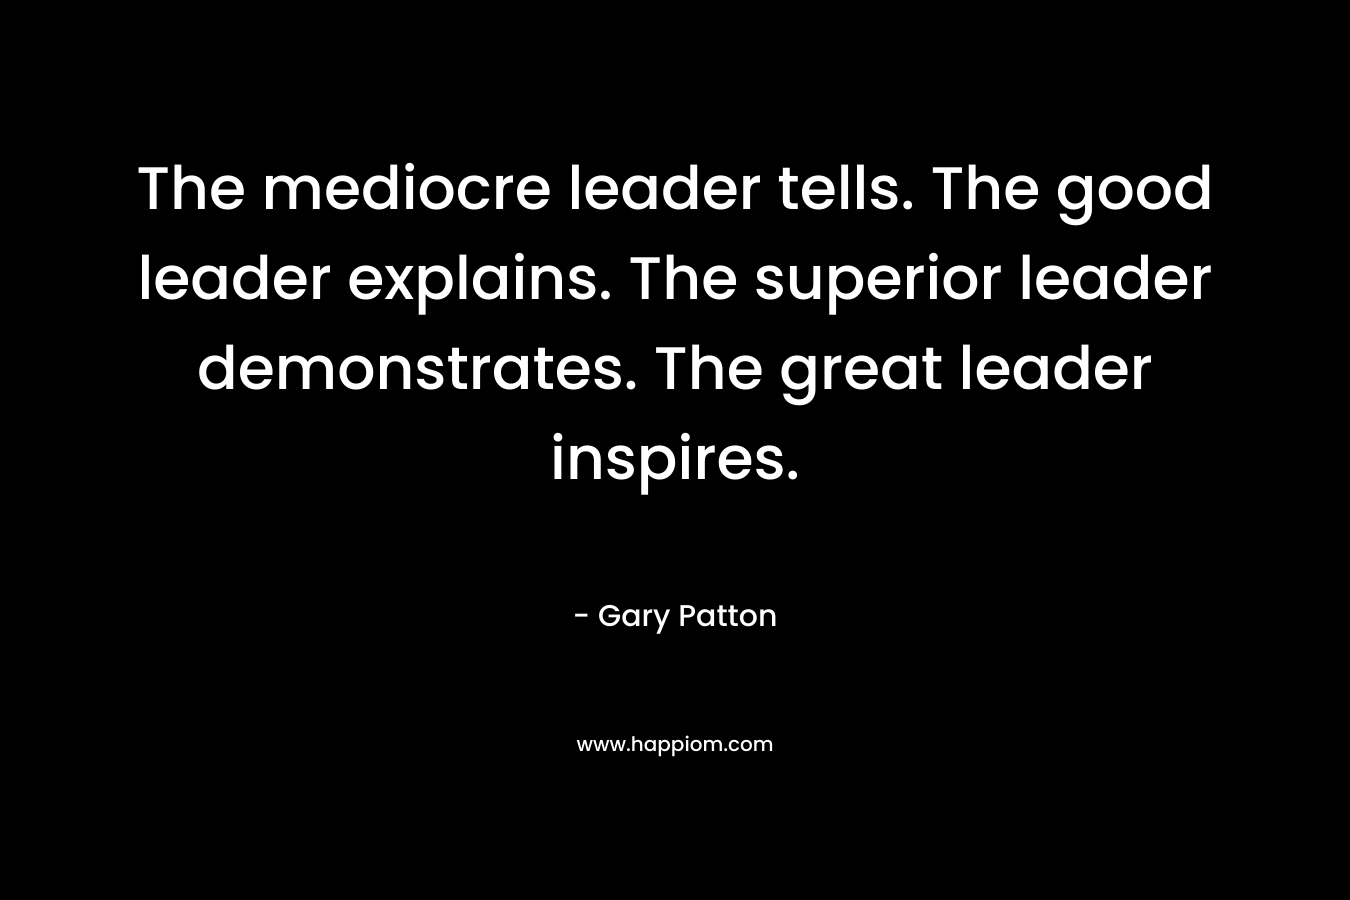 The mediocre leader tells. The good leader explains. The superior leader demonstrates. The great leader inspires.